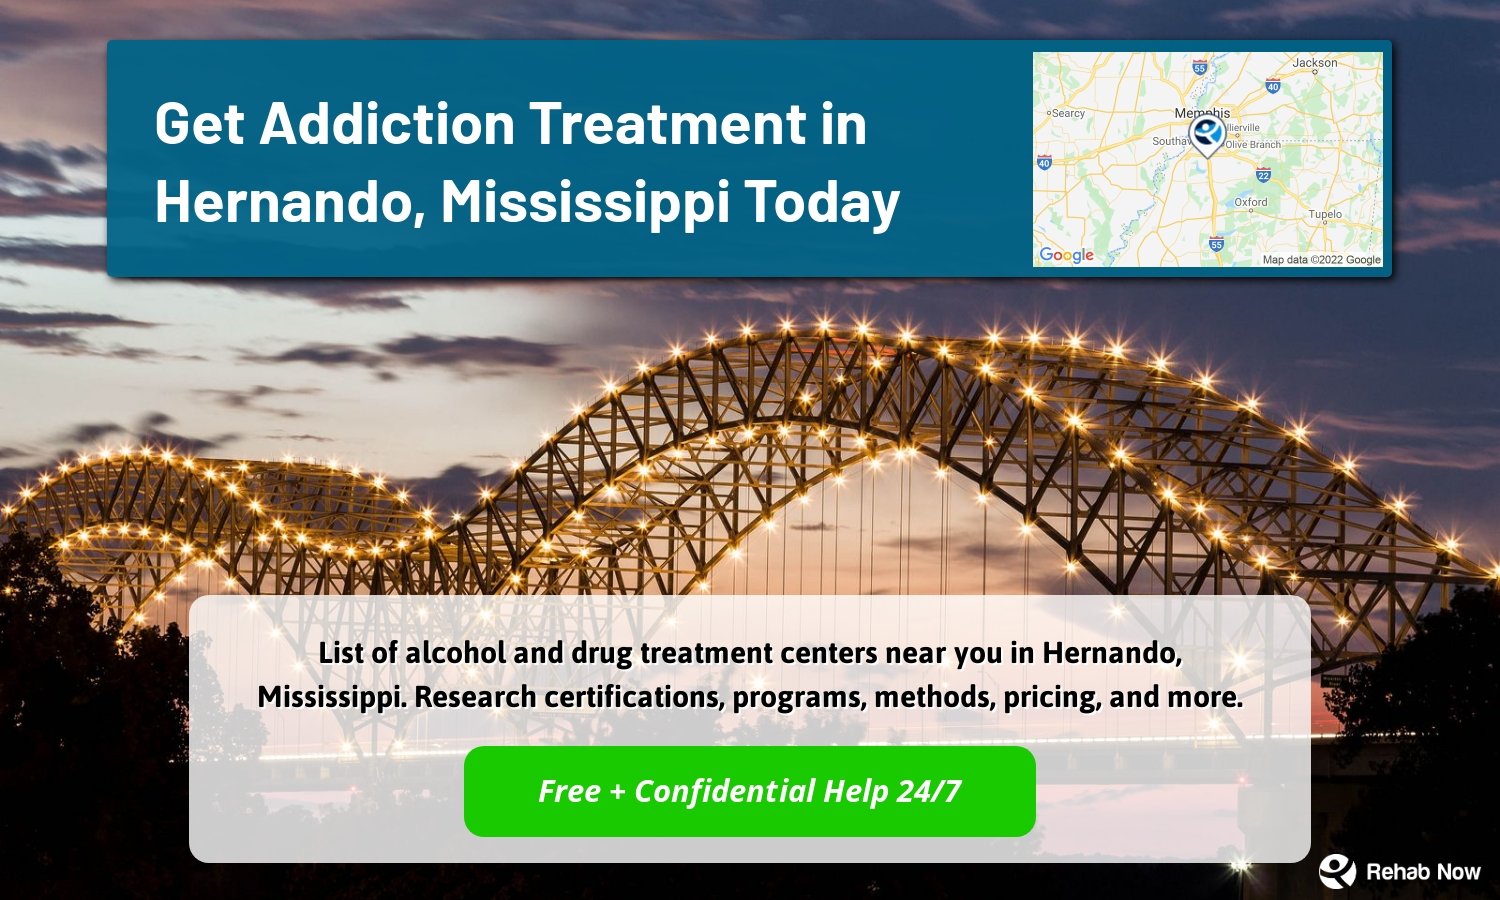 List of alcohol and drug treatment centers near you in Hernando, Mississippi. Research certifications, programs, methods, pricing, and more.